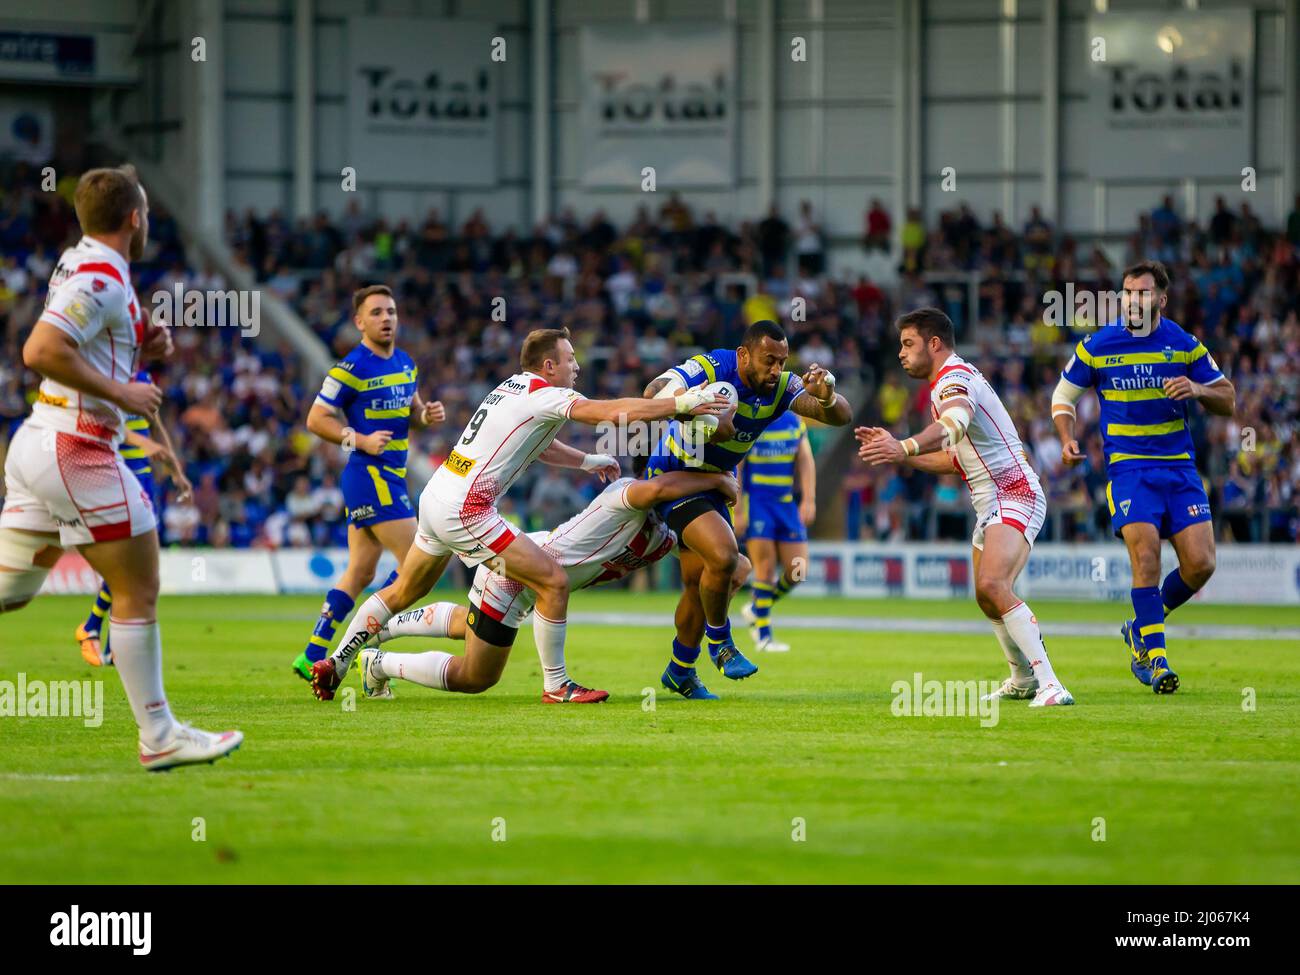 Warrington 16 July 2015: Warrington Wolves hosted St Helens at the Halliwell Jones Stadium. Roy Asotasi runswhilst being tackled Stock Photo